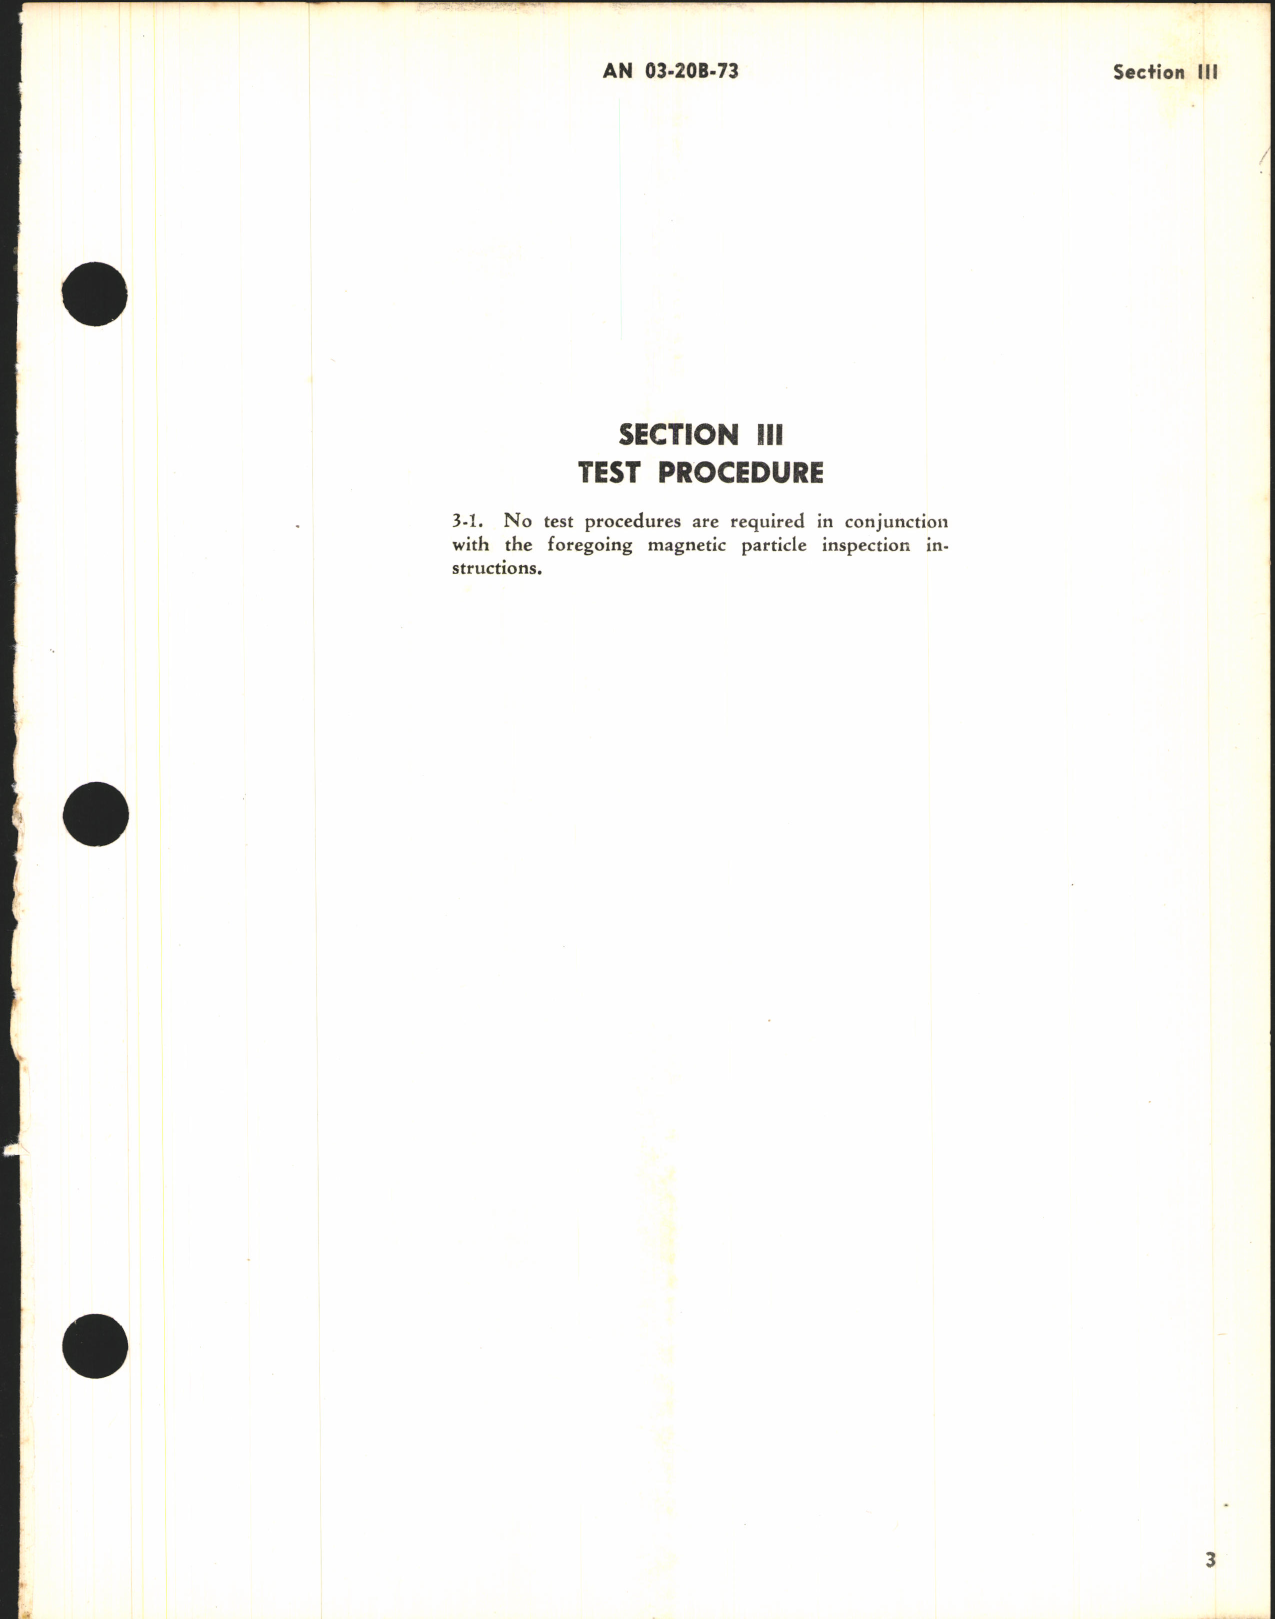 Sample page 5 from AirCorps Library document: Overhaul Instructions for Magnetic Inspection of Small Parts for Electric Propellers